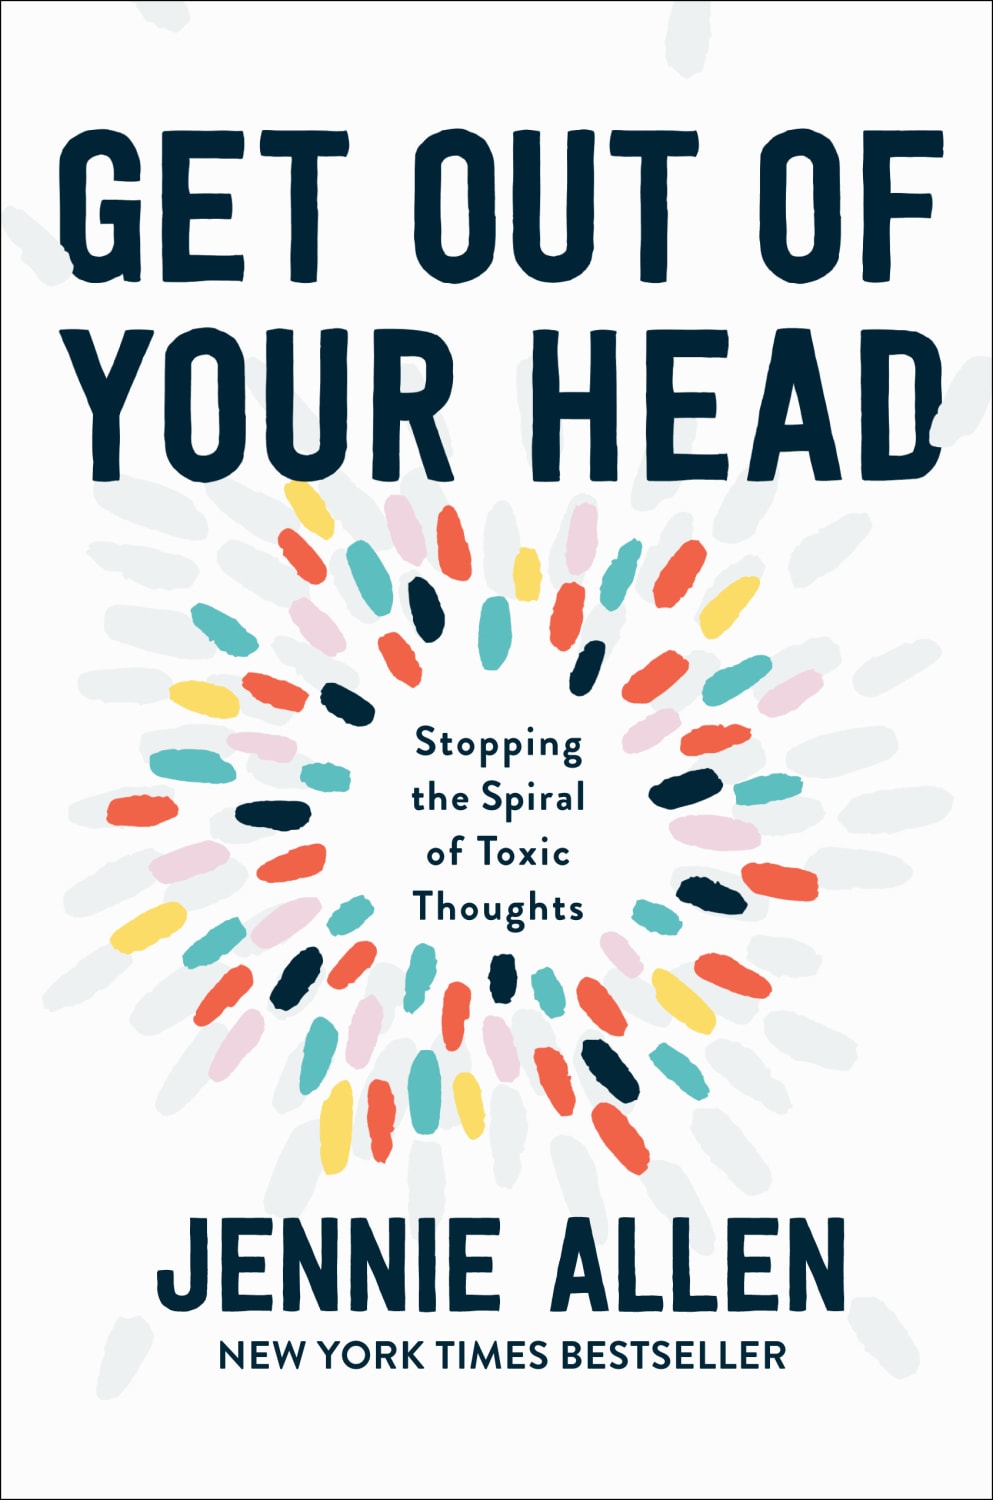 jennie allen get out of your head review